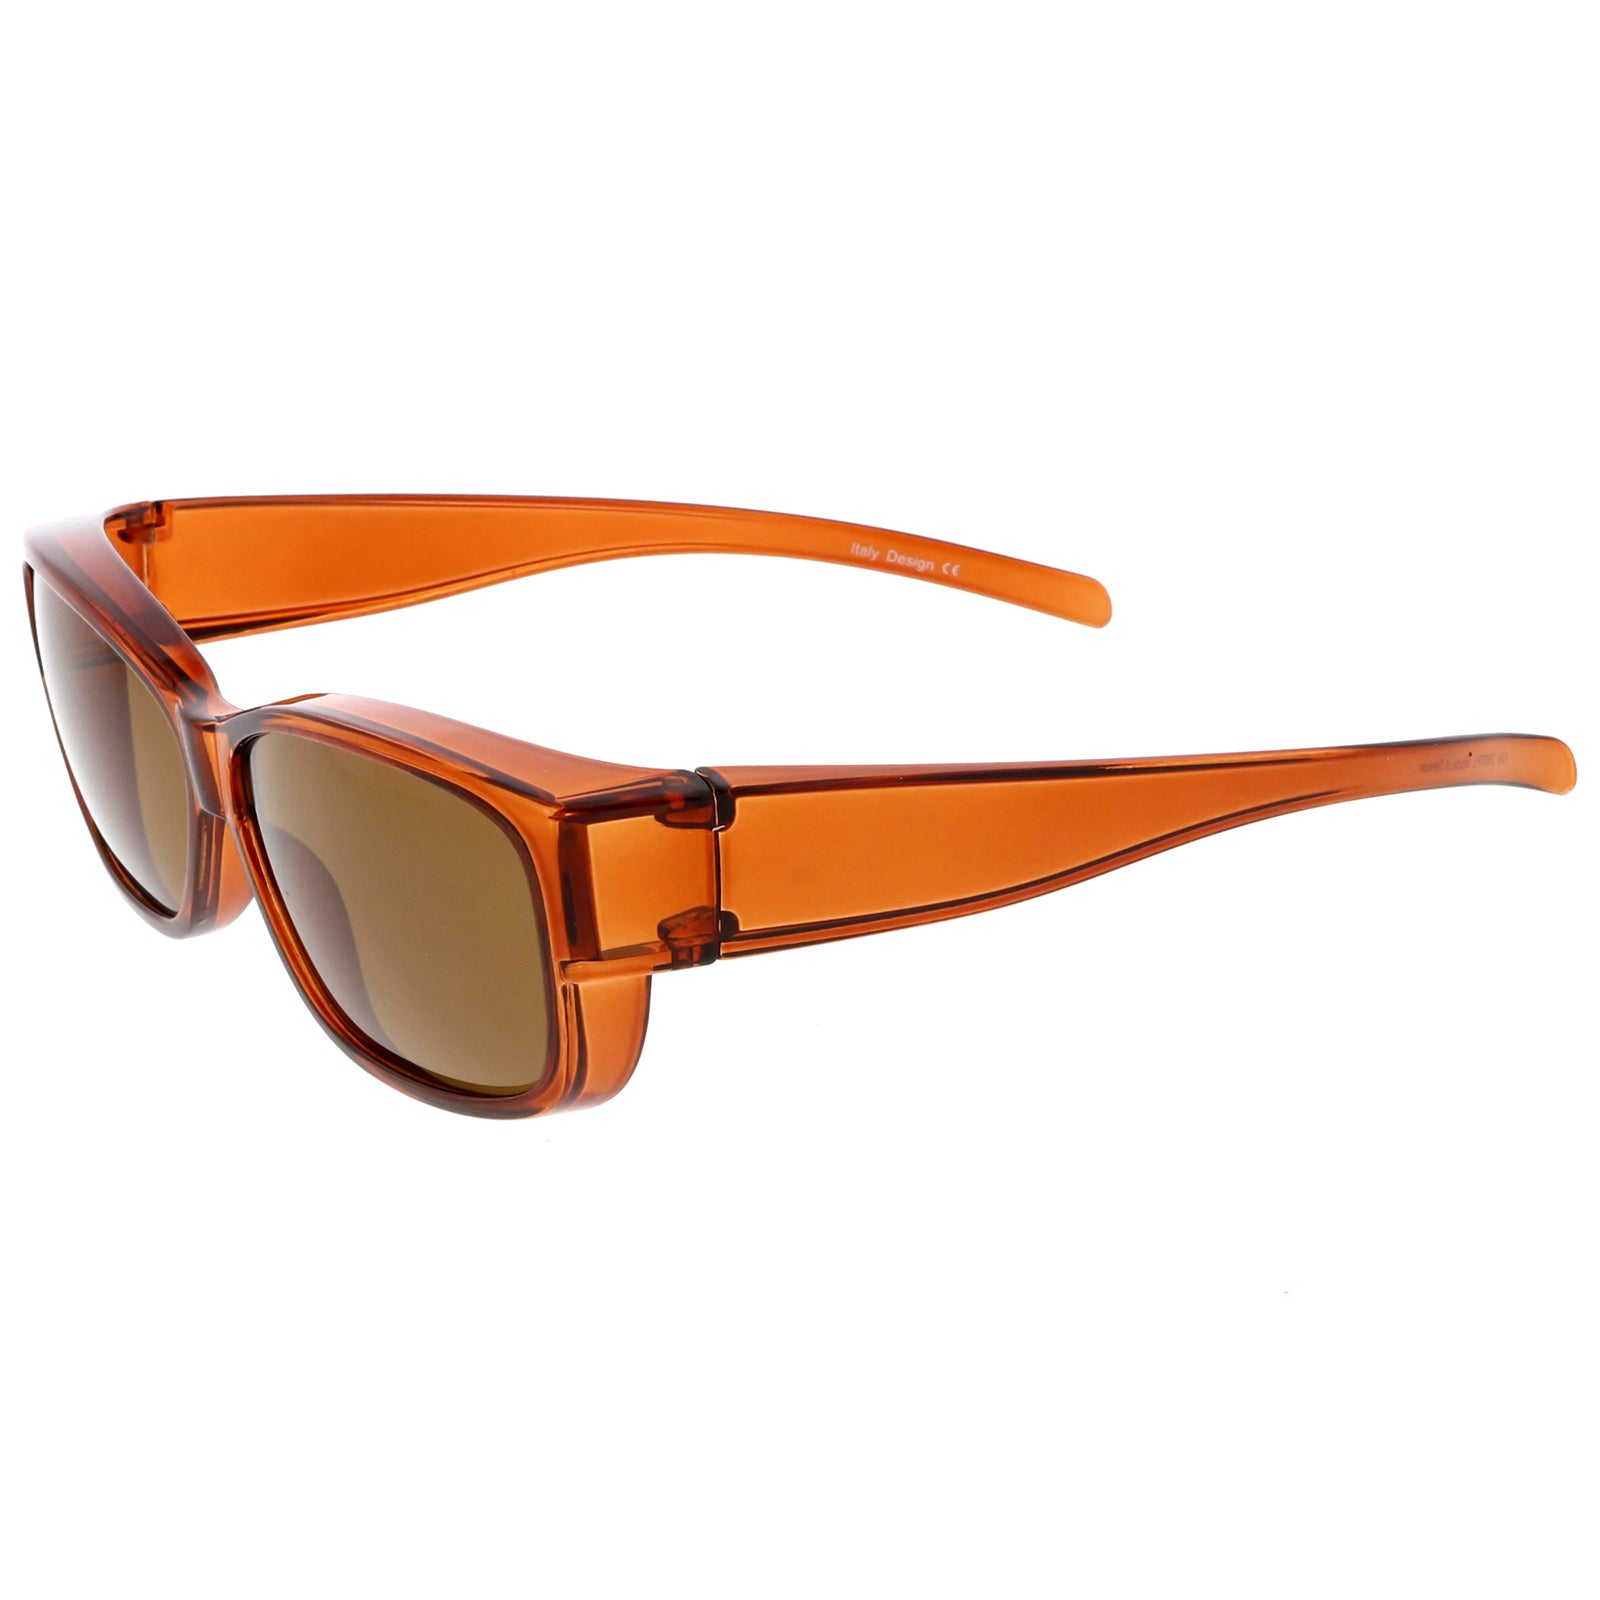 Oversize Thick Side Temple Women's Squared Sunnies